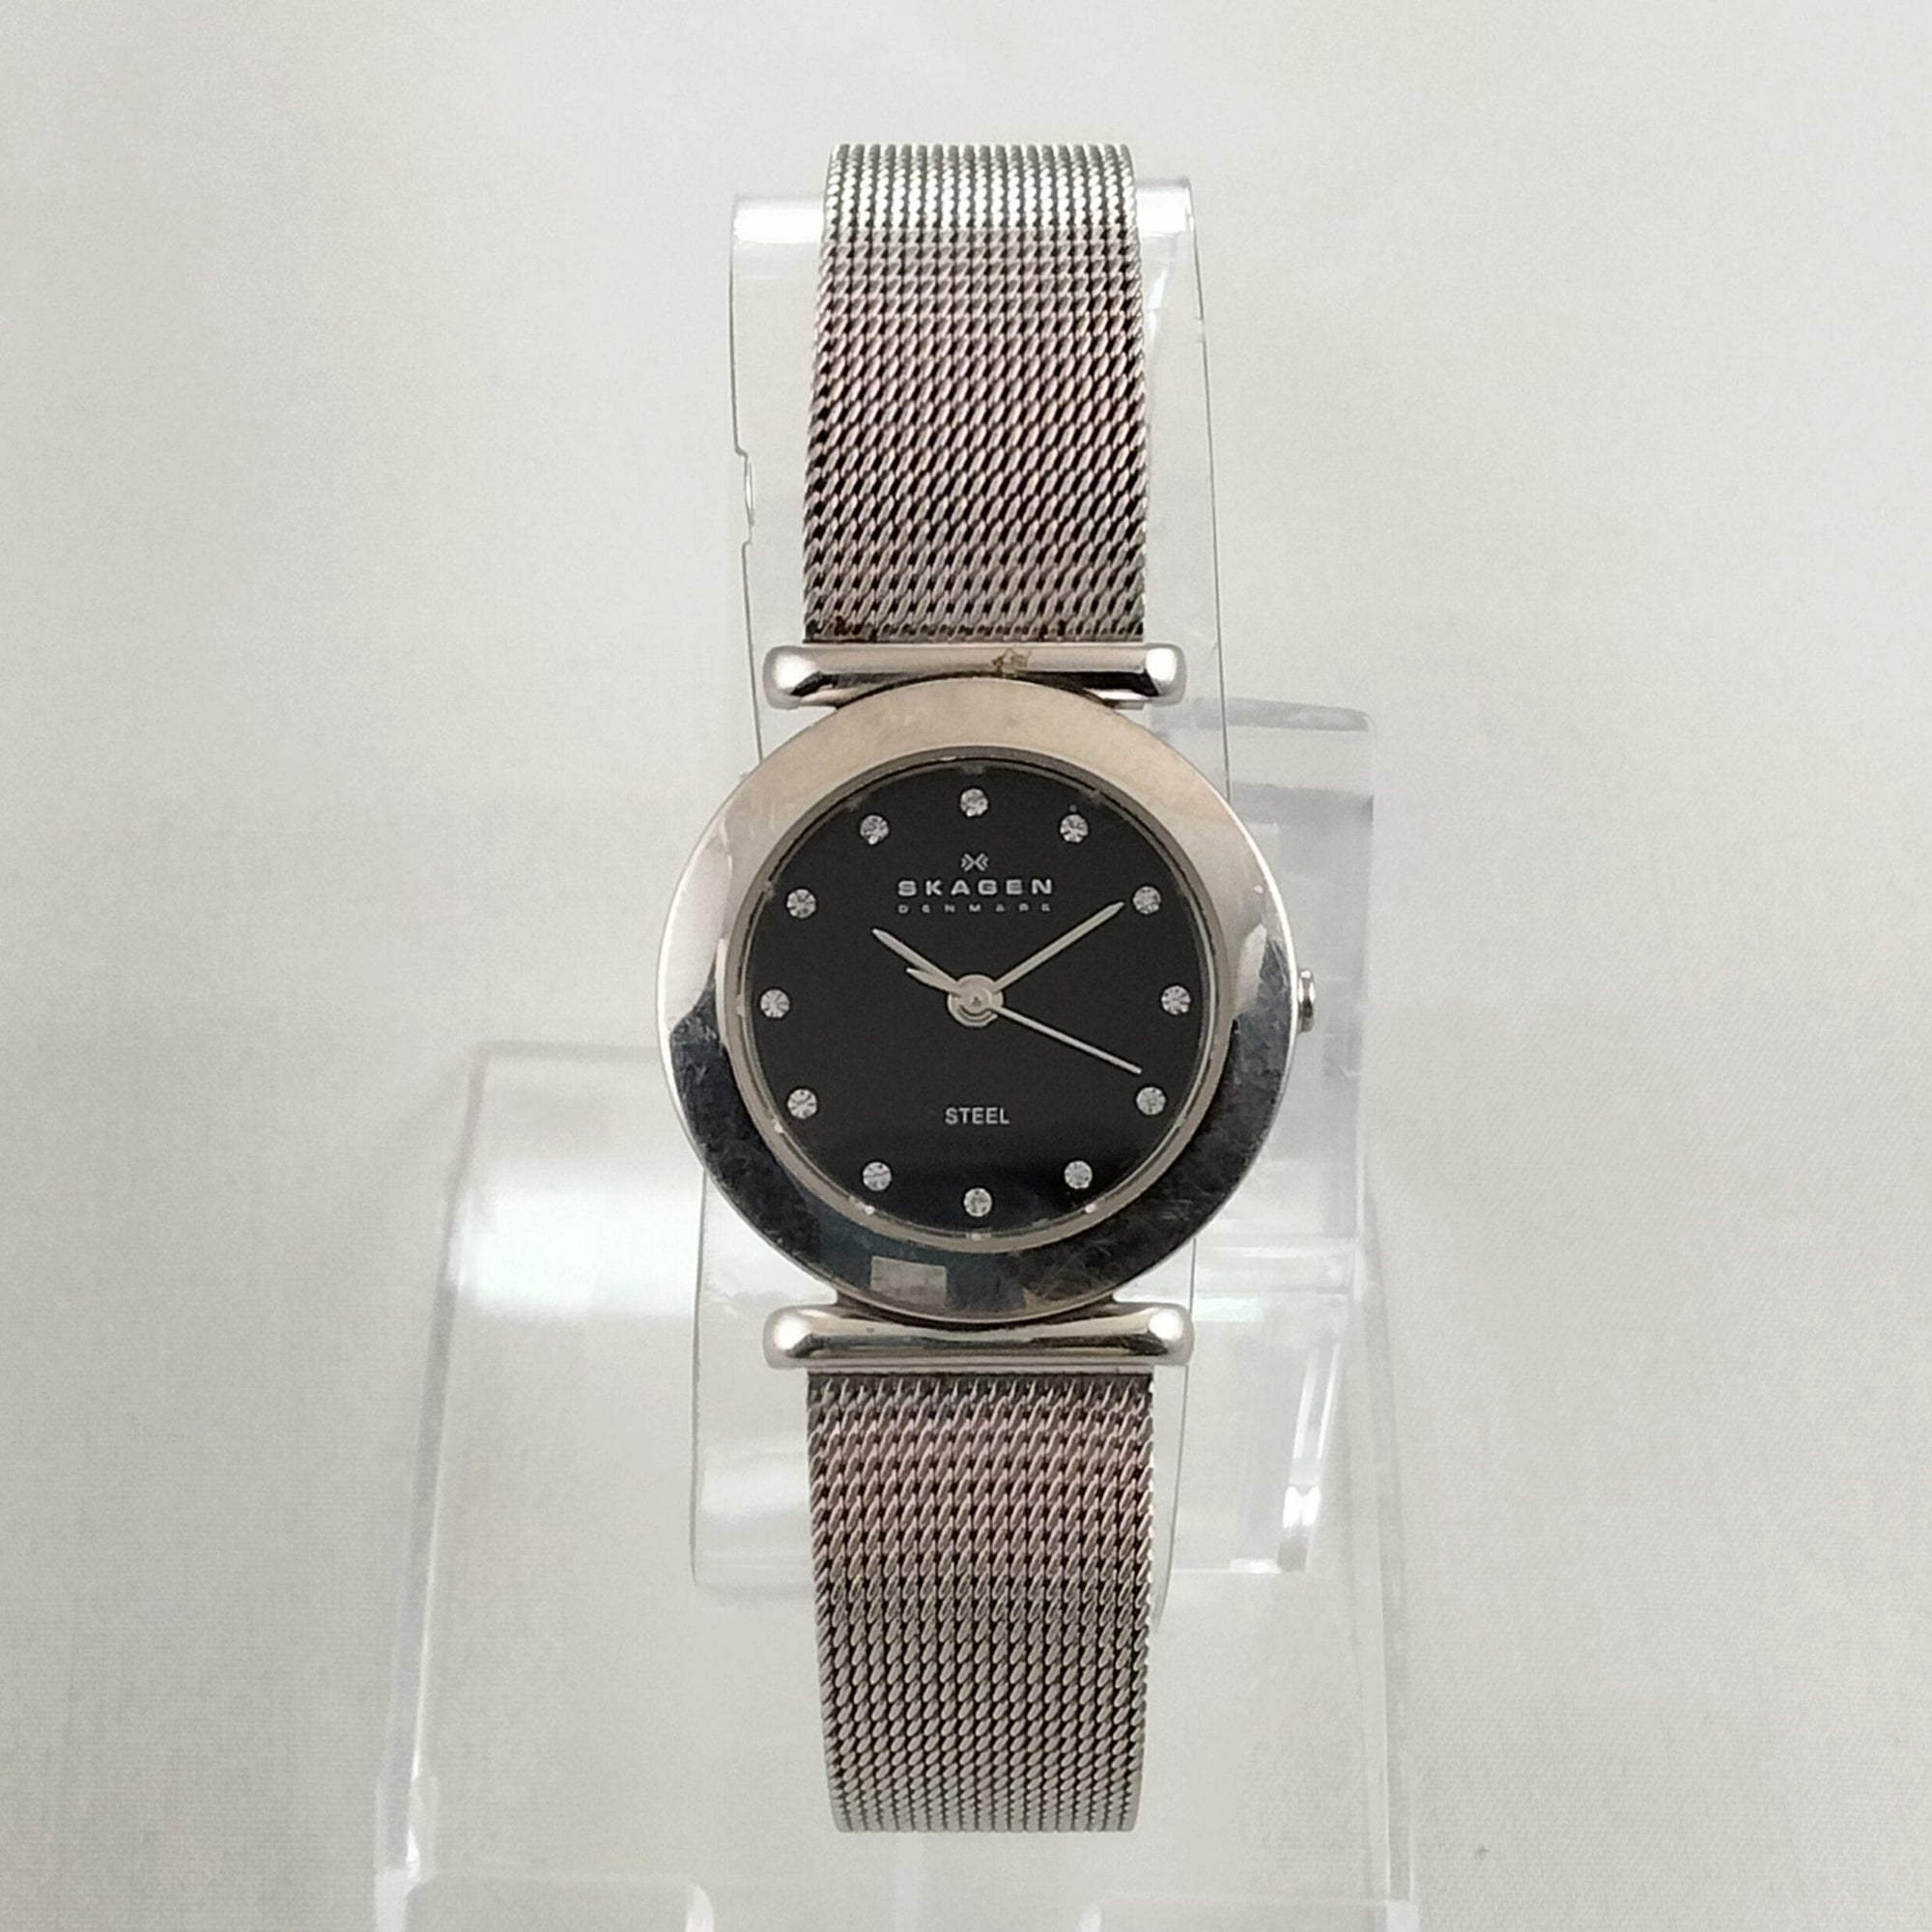 I Like Mikes Mid Century Modern Watches Skagen Women's Stainless Steel Watch, Black Dial, Jewel Hour Markers, Mesh Strap